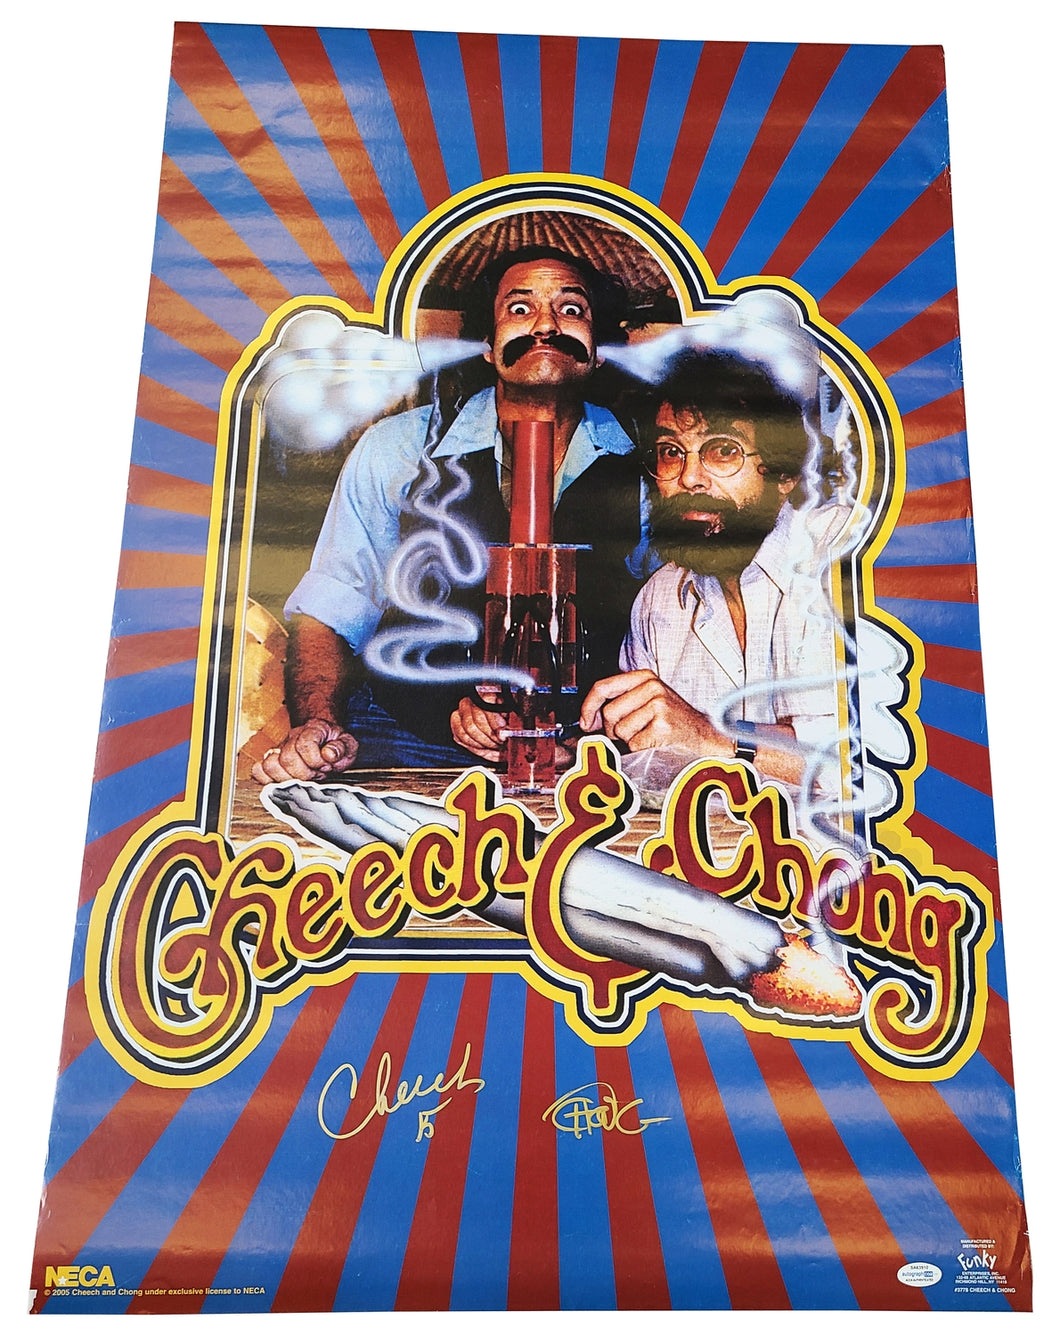 Cheech & Chong Autographed Signed 24x36 Poster